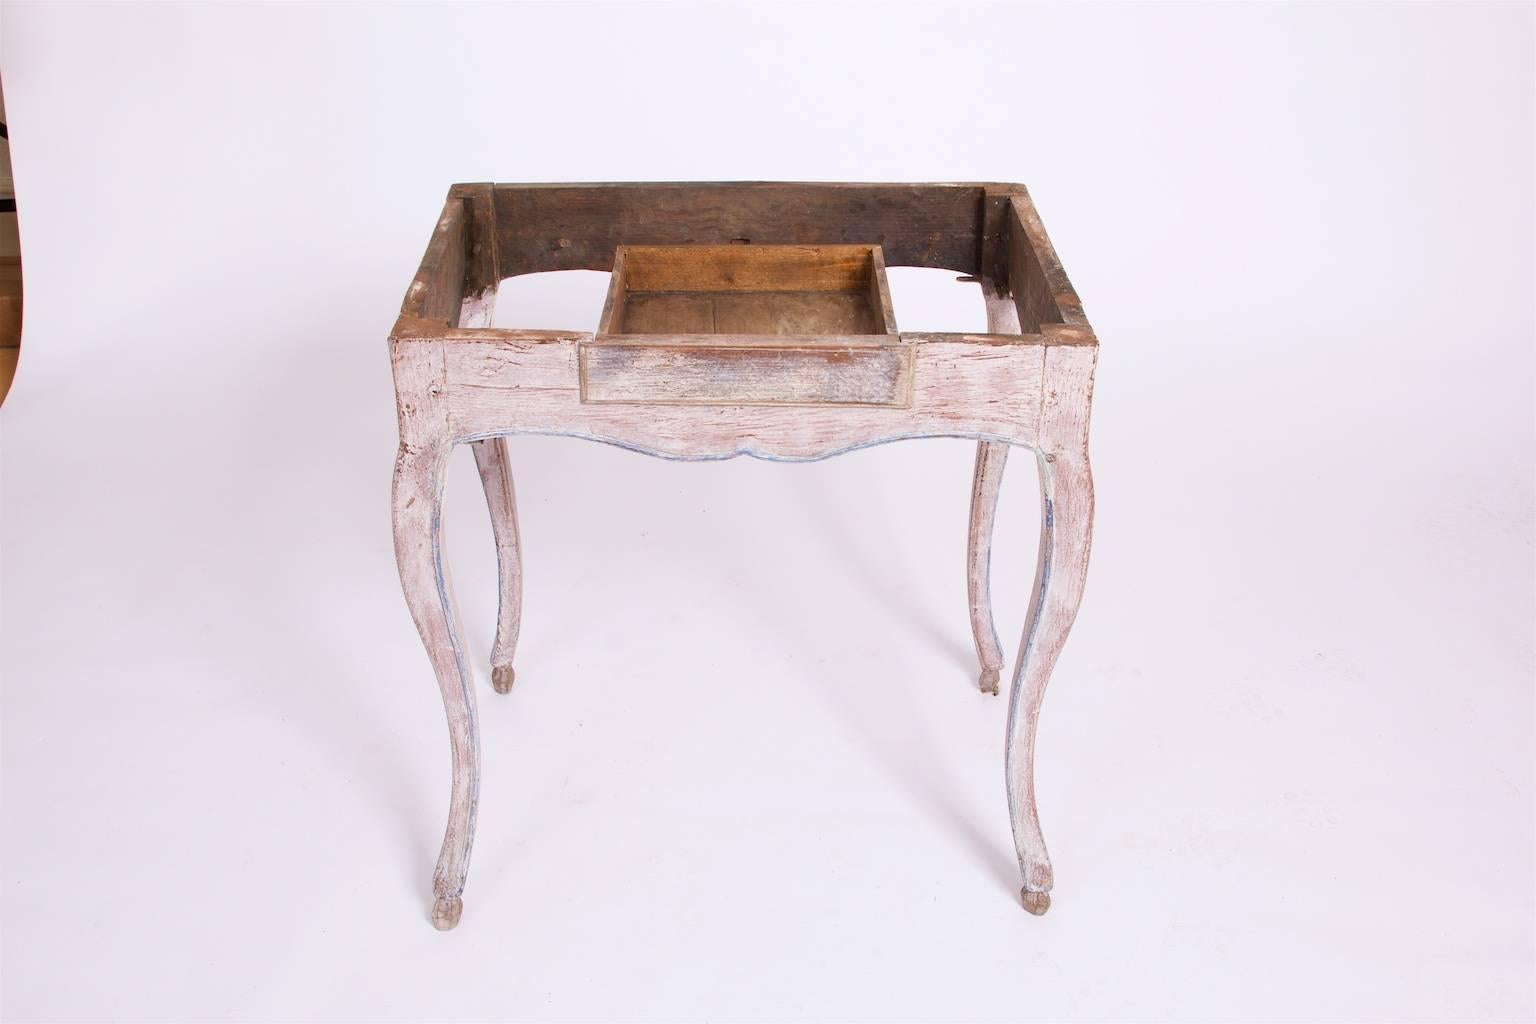 Table with Top Made of Faience, 18th Century, German In Fair Condition For Sale In Malmo, SE